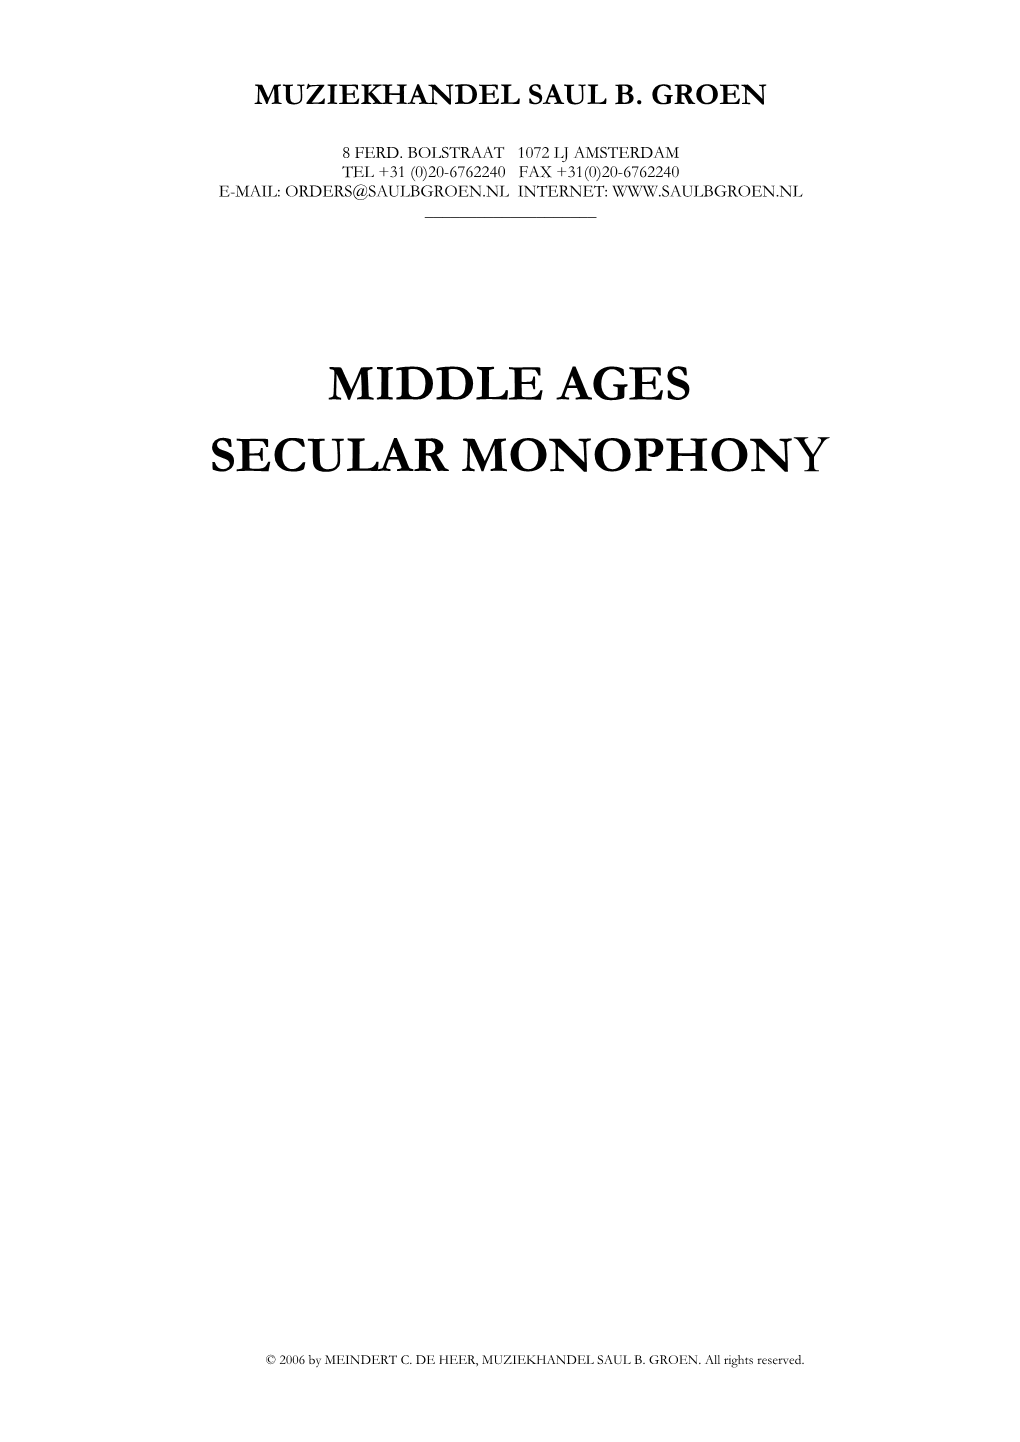 Middle Ages Secular Monophony